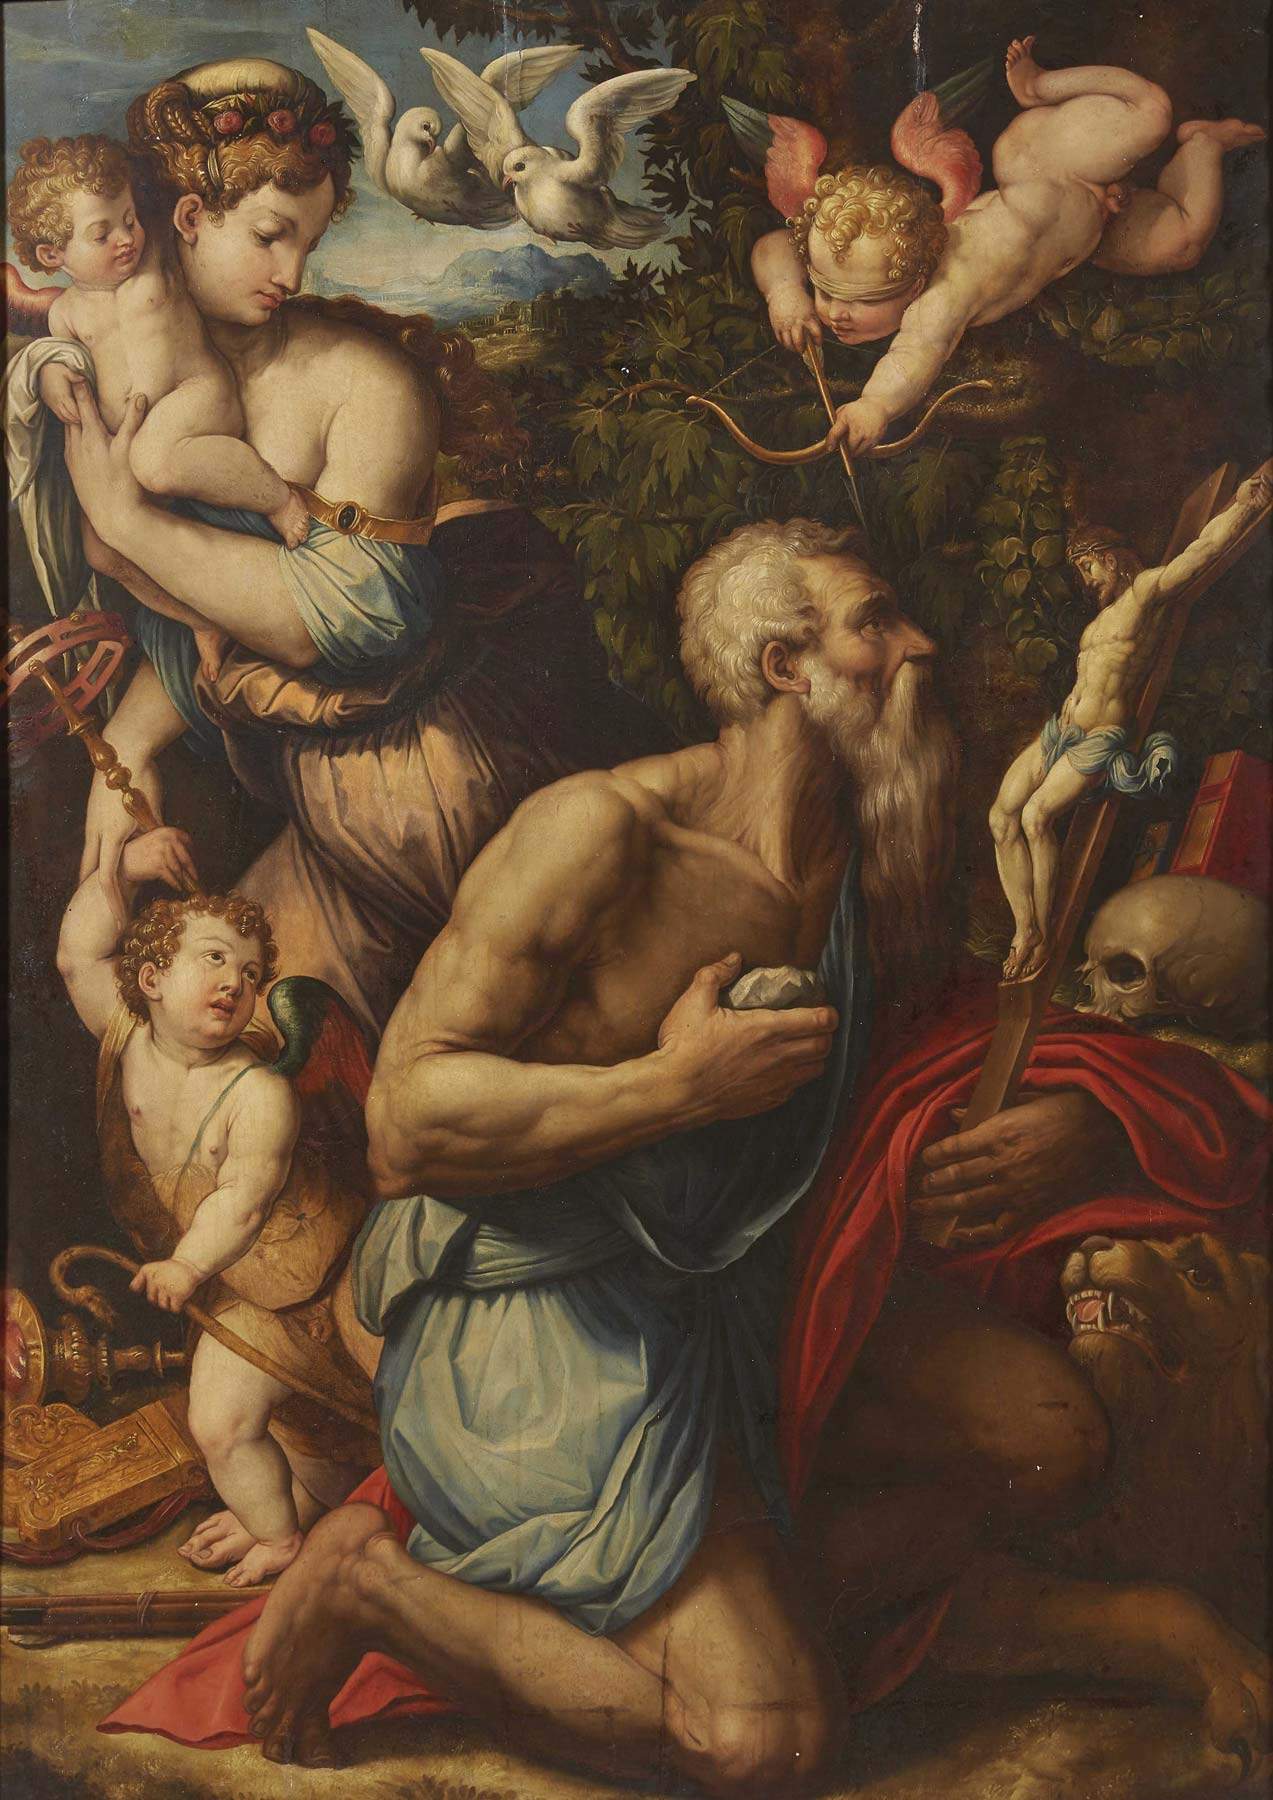 Important painting by Giorgio Vasari sold at auction for 800,000 euros